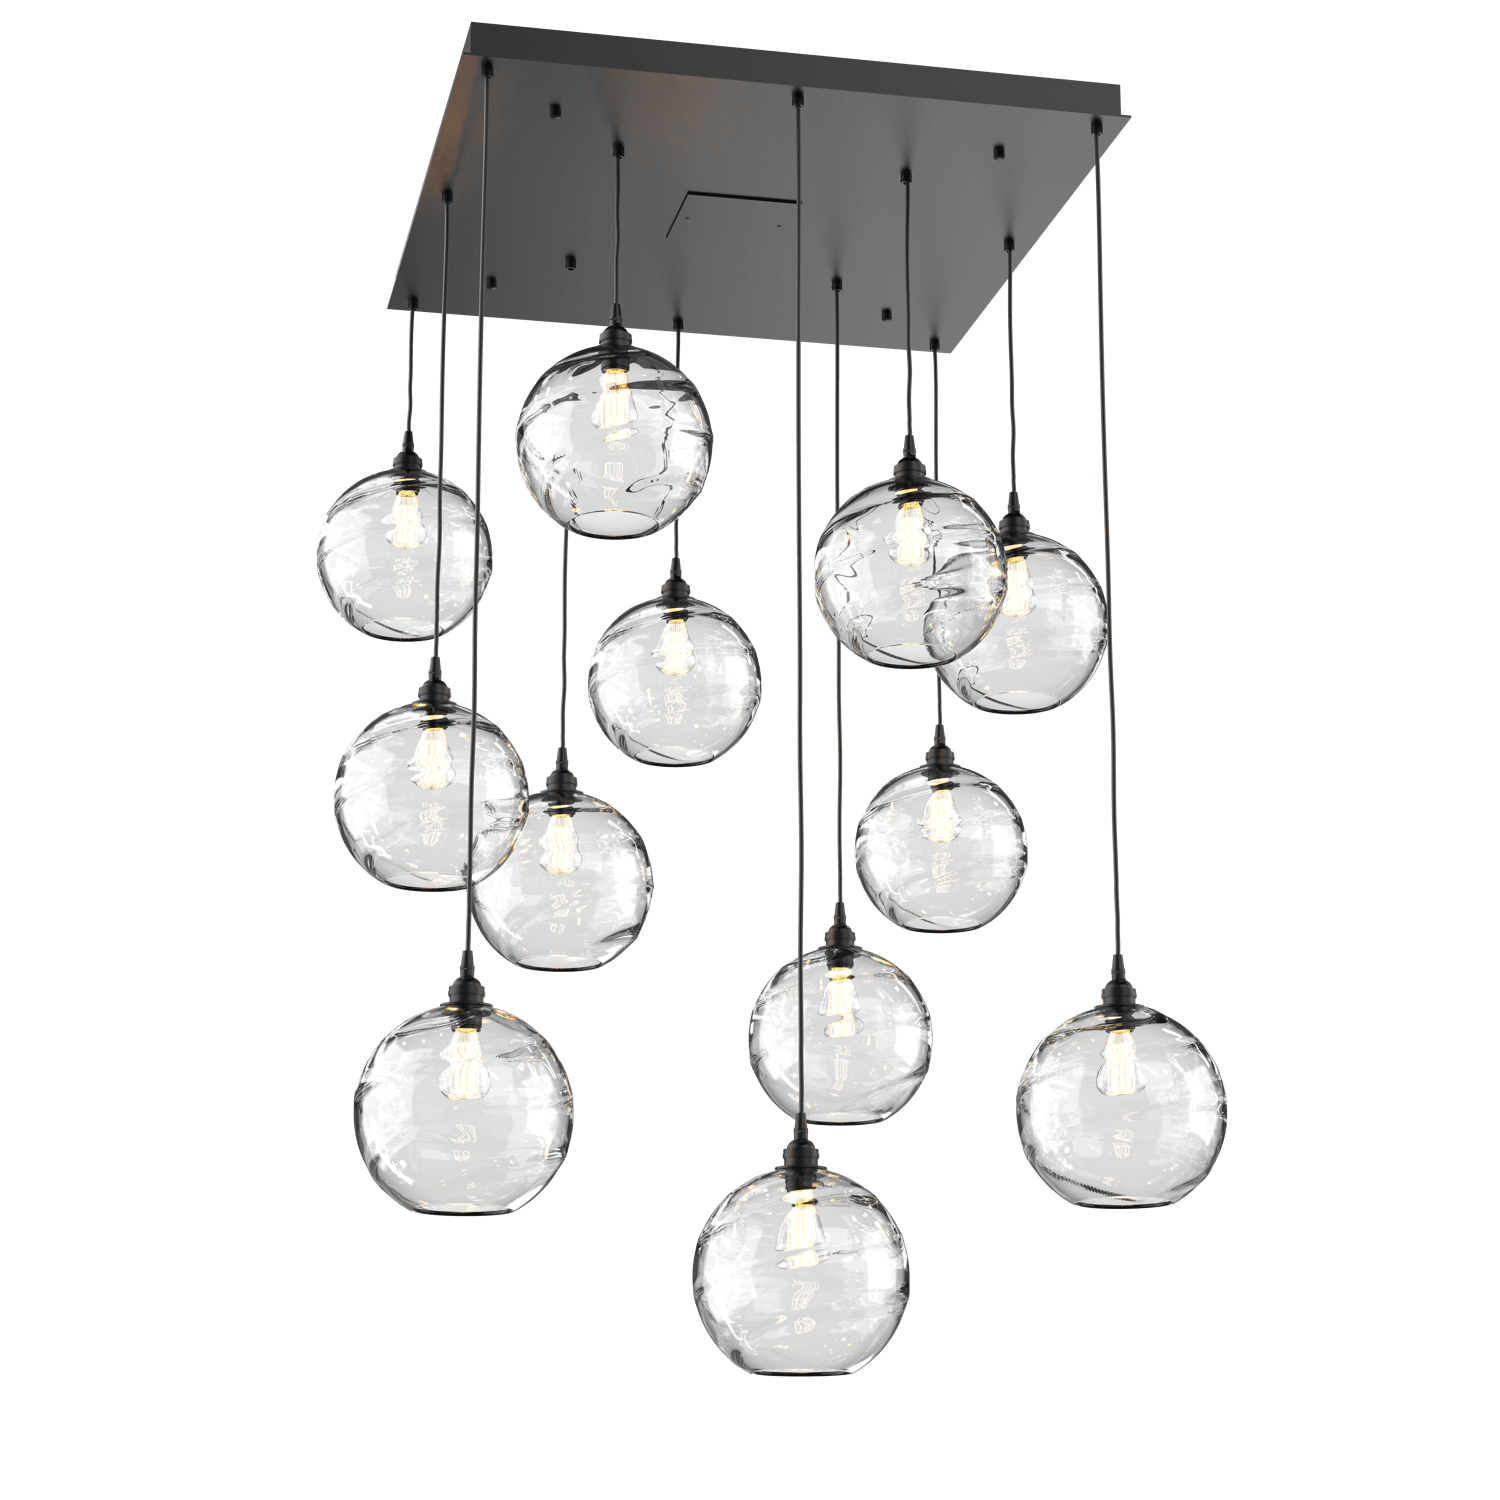 CHB0047-12-MB-OC-Hammerton-Studio-Optic-Blown-Glass-Terra-12-light-square-pendant-chandelier-with-matte-black-finish-and-optic-clear-blown-glass-shades-and-incandescent-lamping